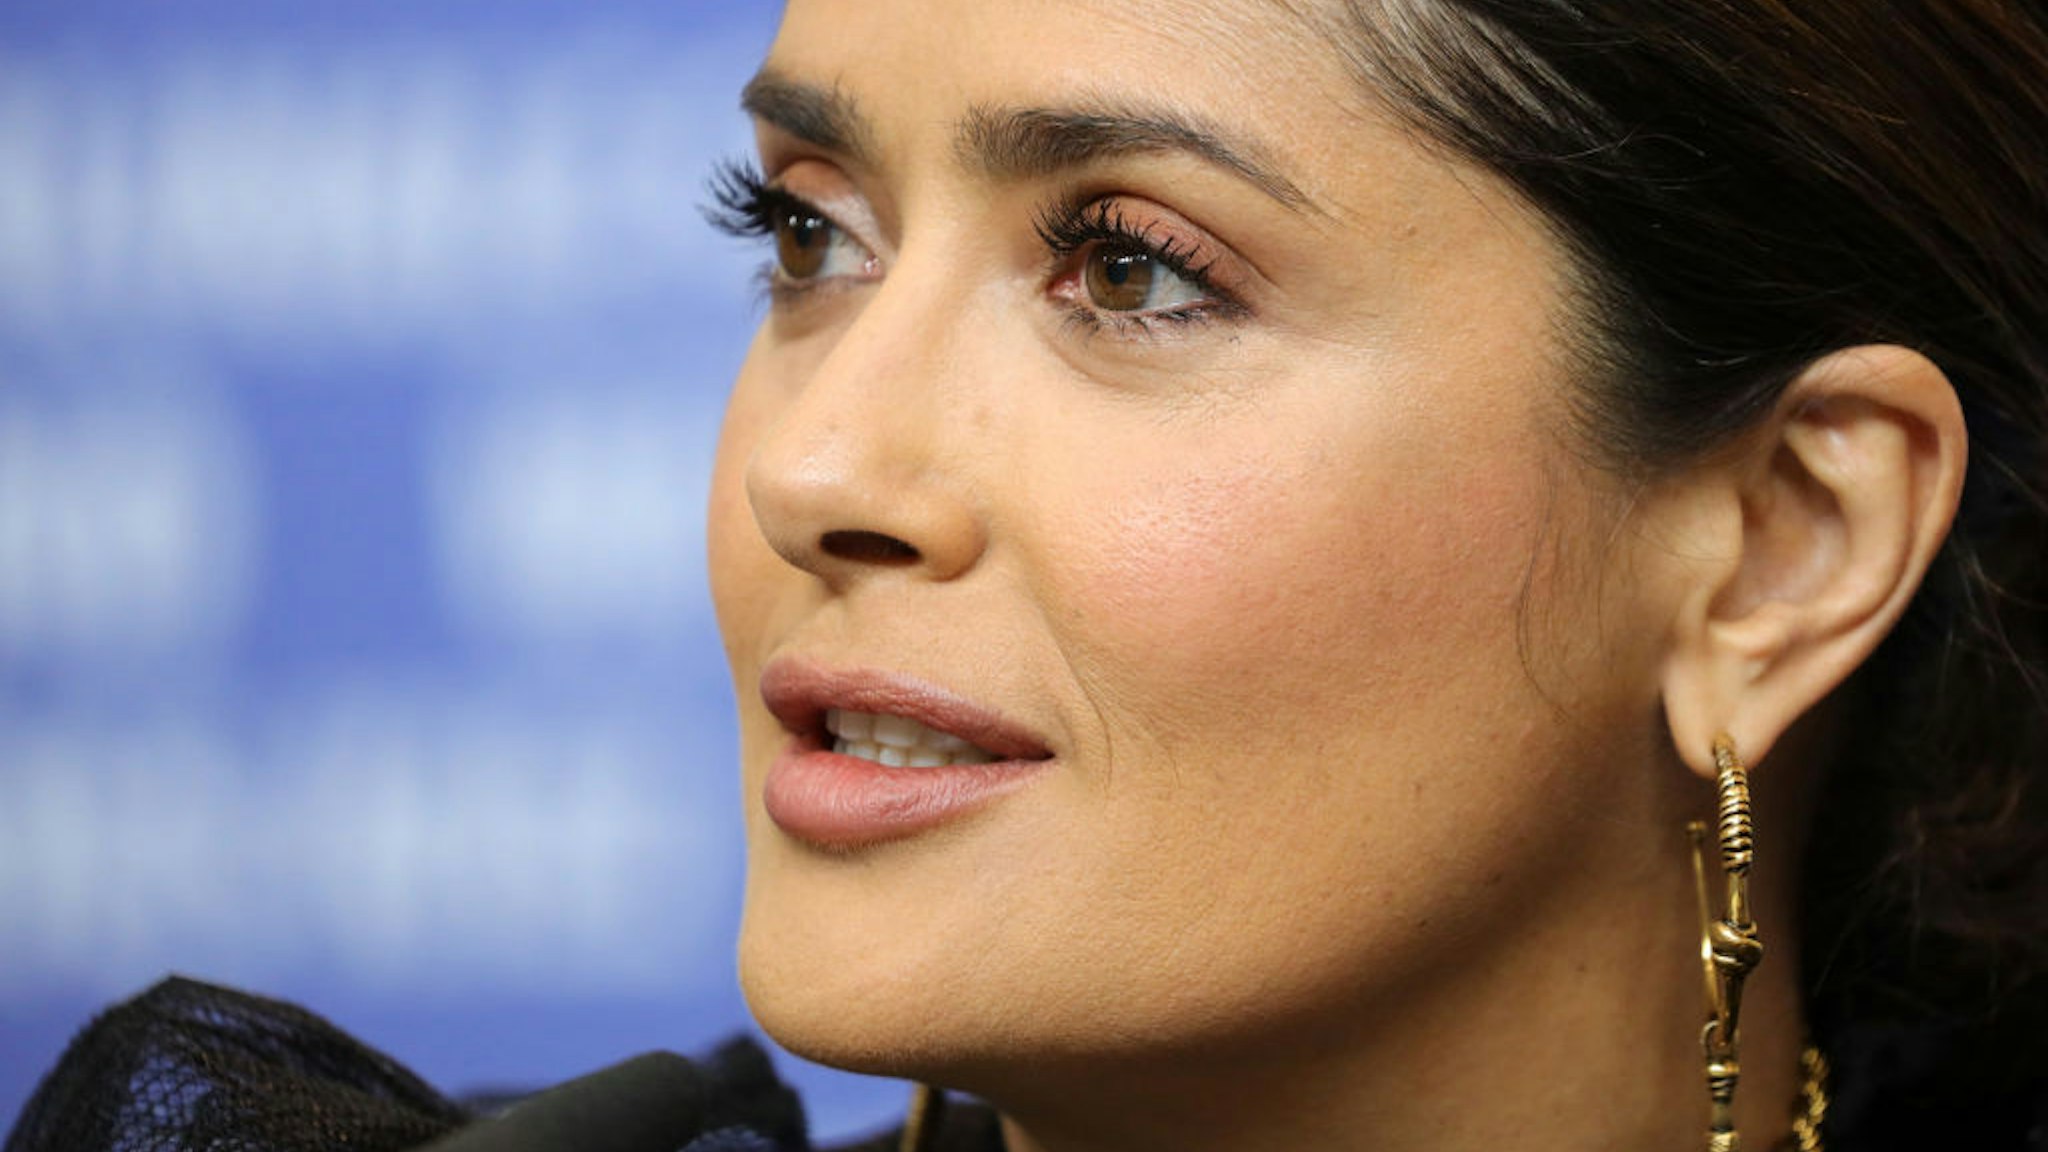 Salma Hayek speaks at the "The Roads Not Taken" press conference during the 70th Berlinale International Film Festival Berlin at Grand Hyatt Hotel on February 26, 2020 in Berlin, Germany.